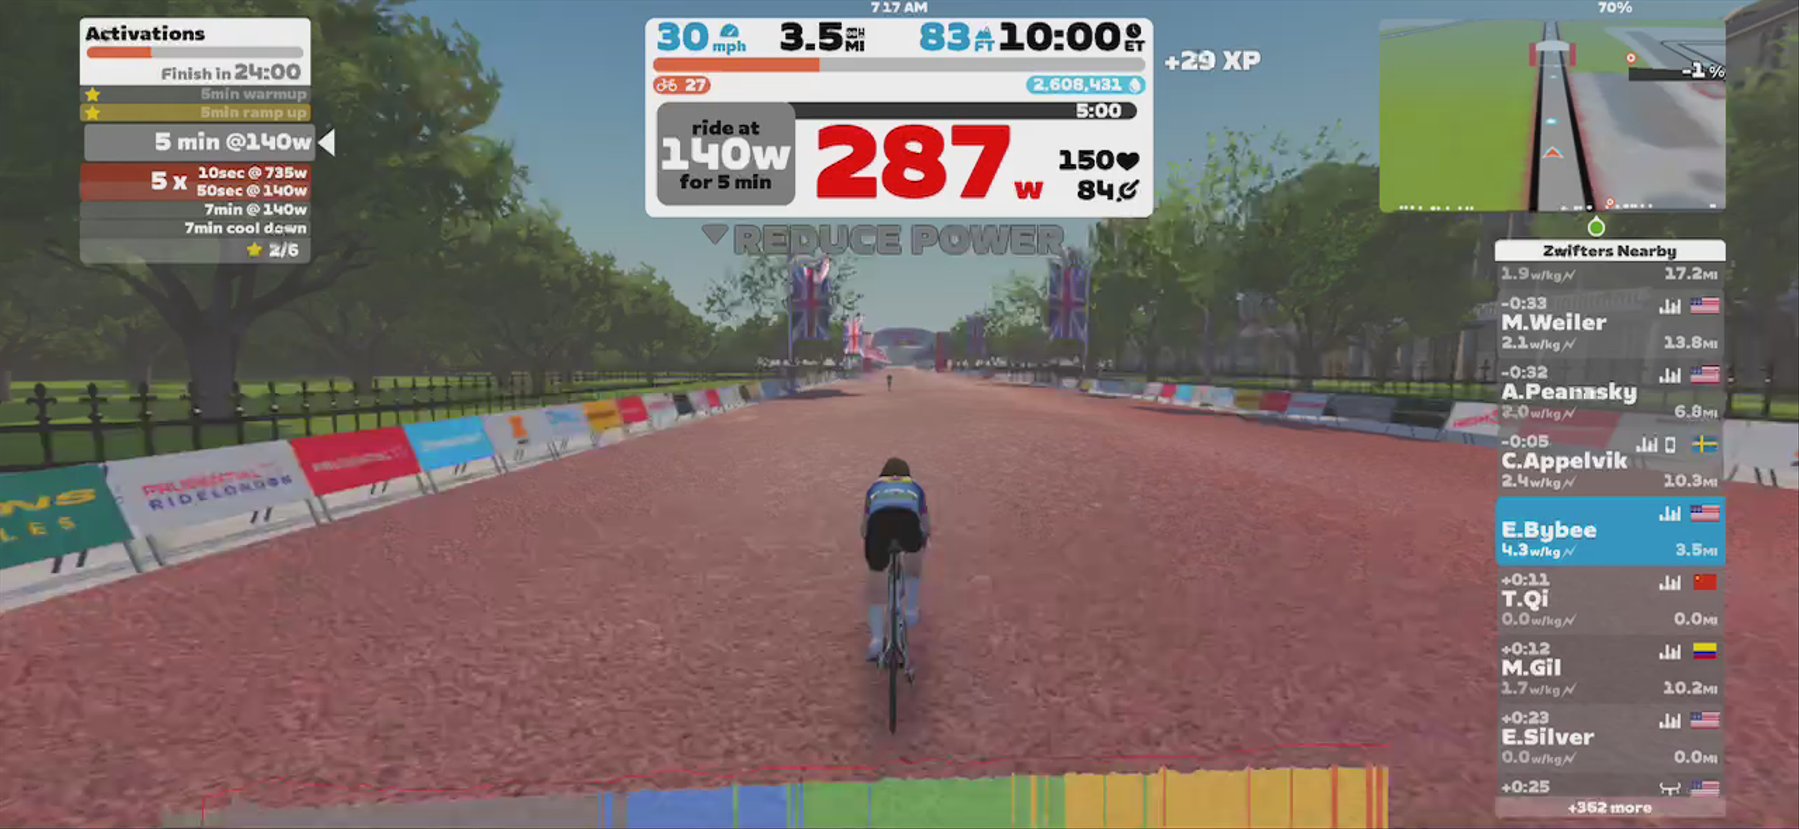 Zwift - Activations in London